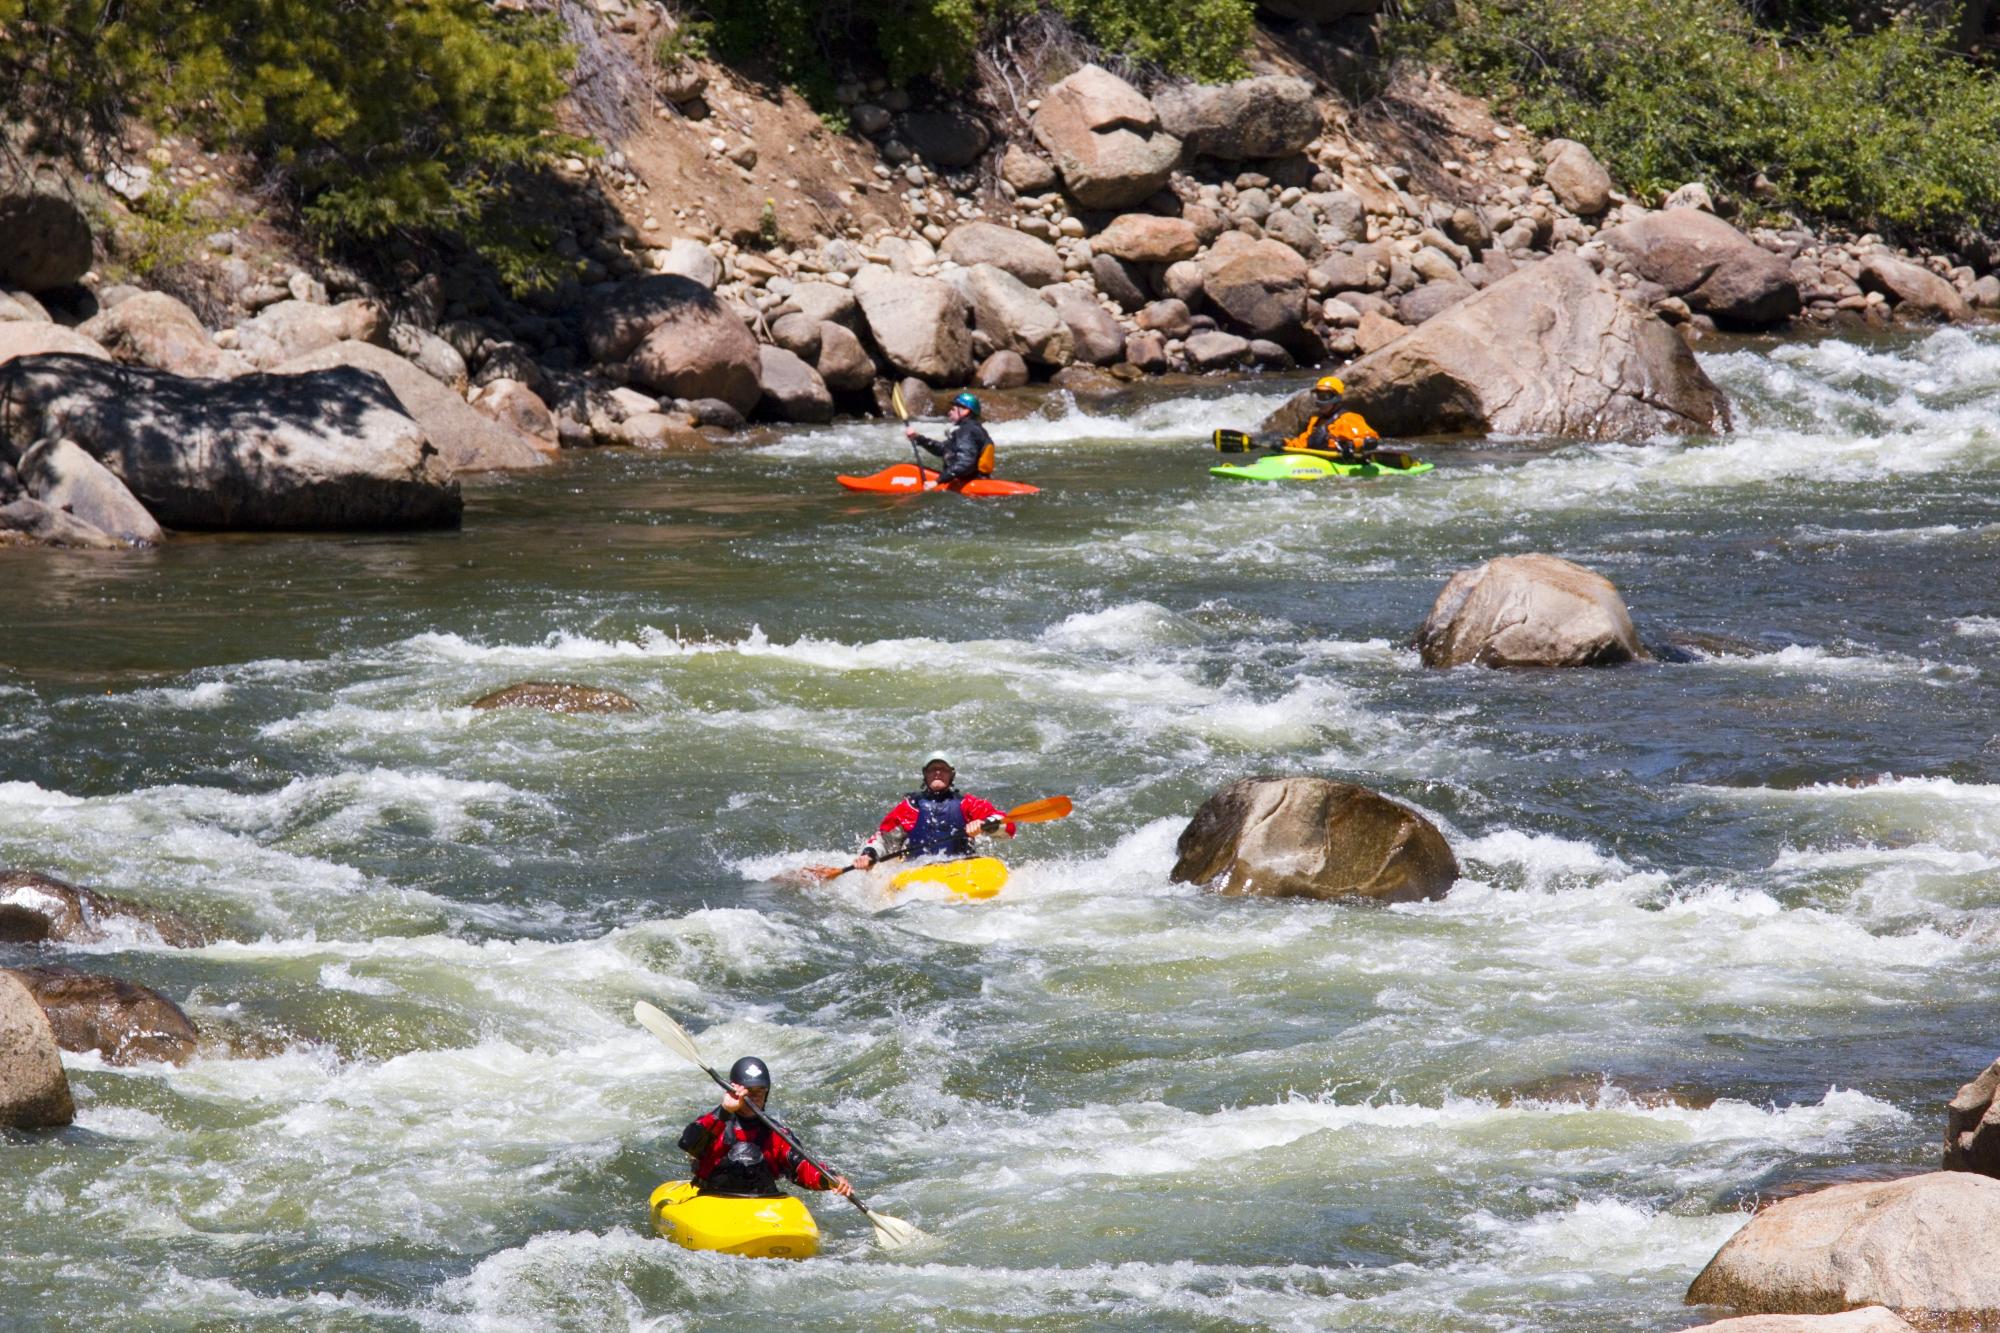 Kayakers in the river